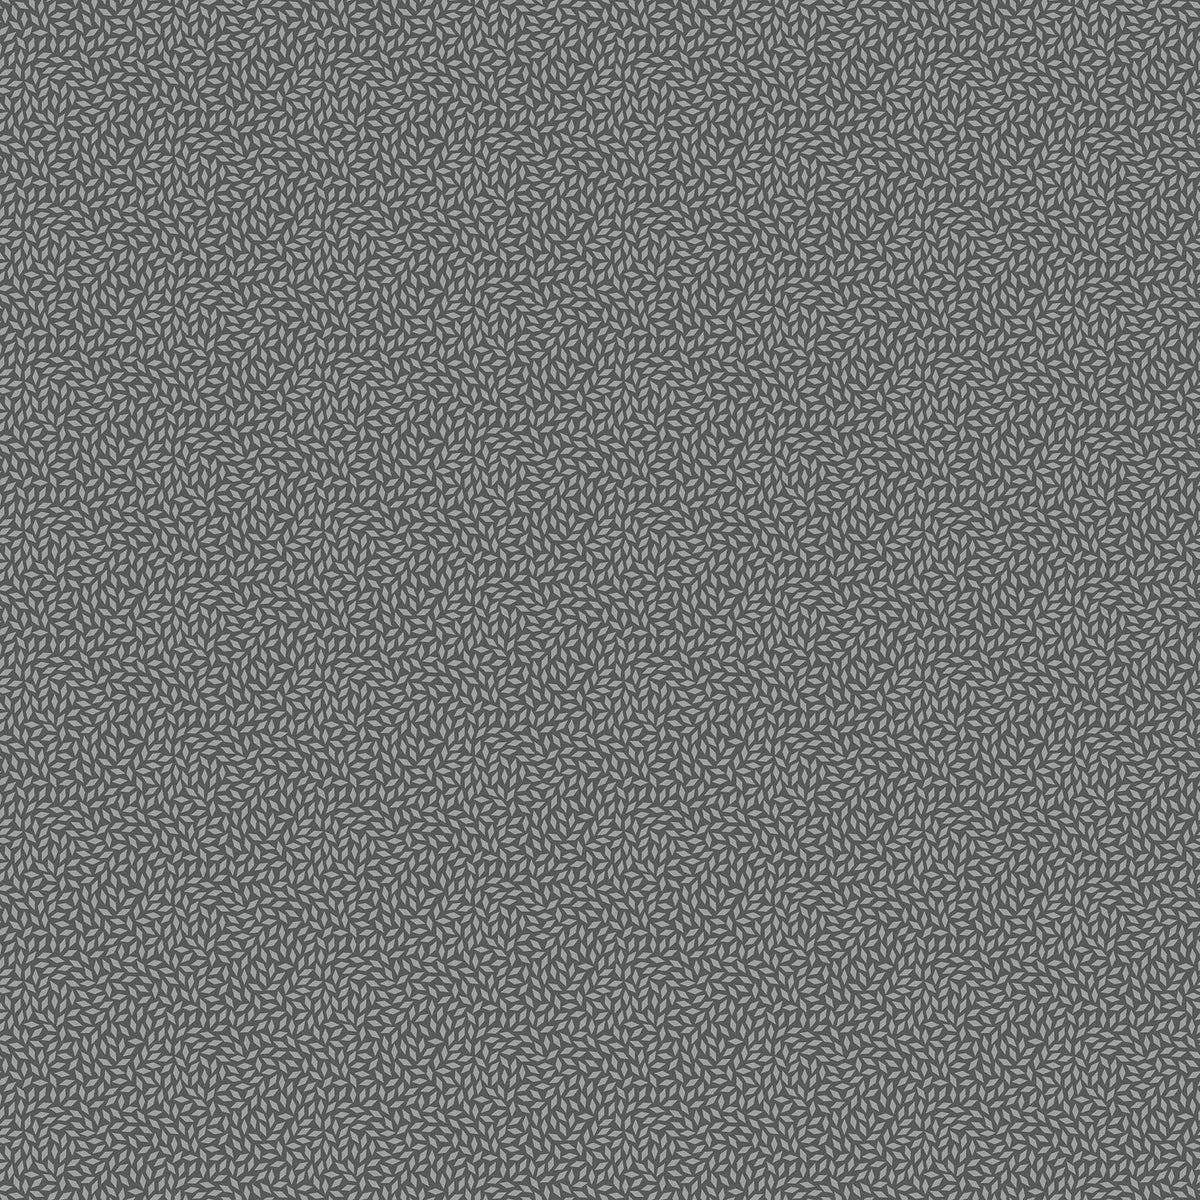 Neutrality Quilt Fabric - Diamonds in Carbon - 10288-93